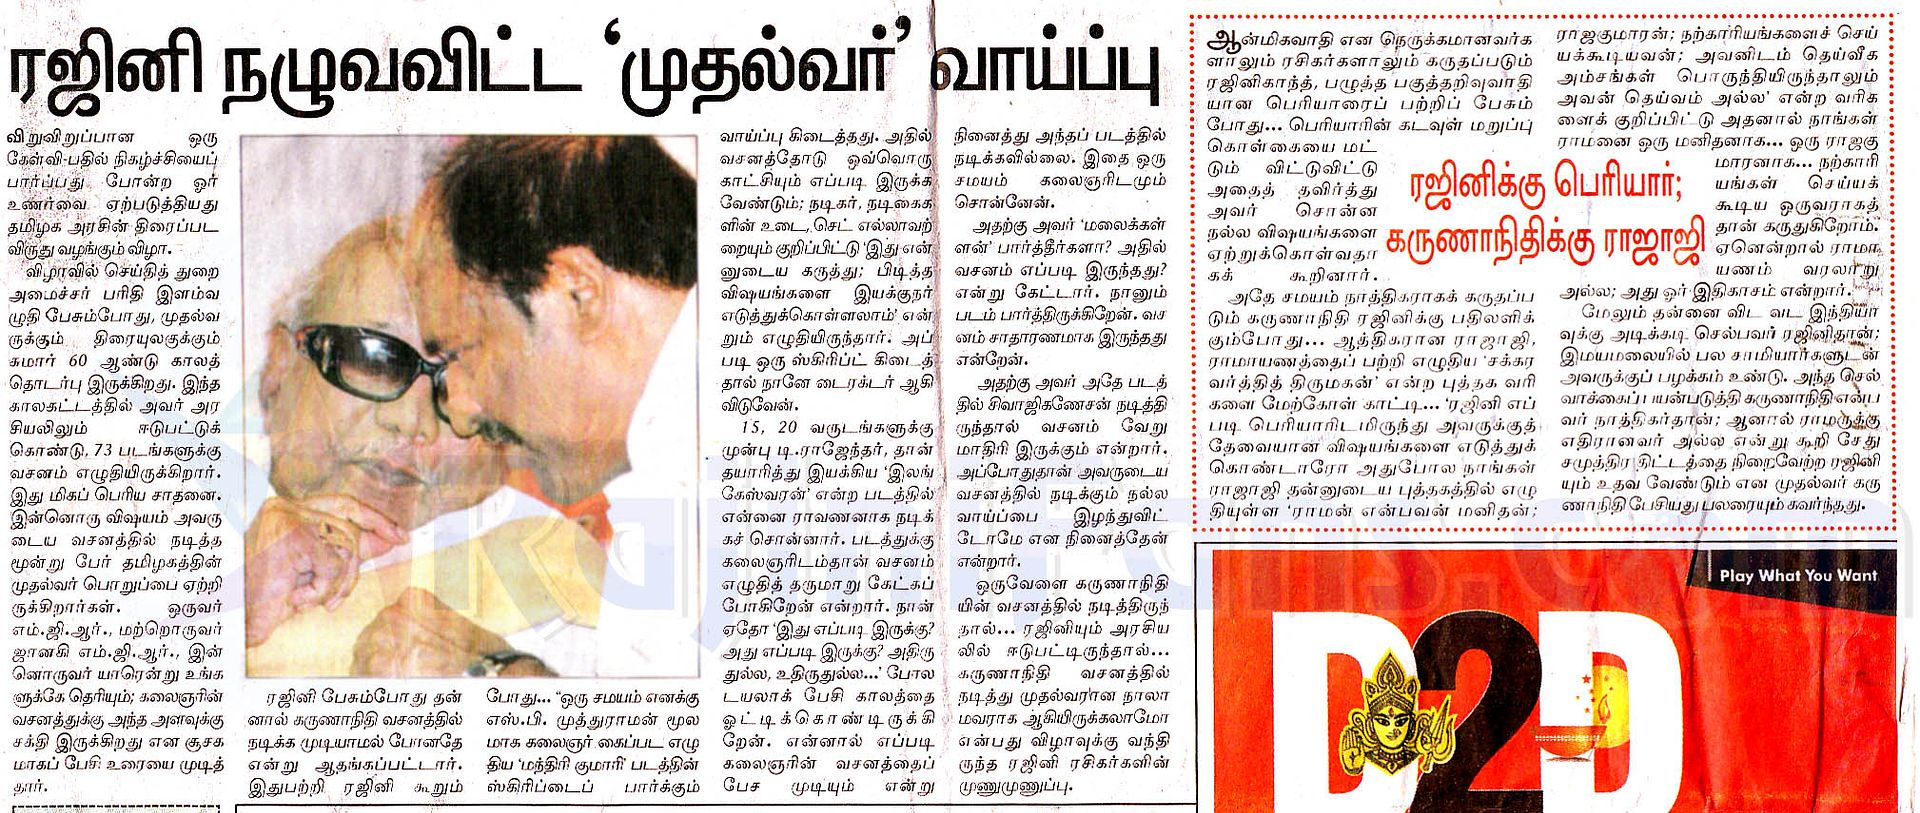 Dinamani_Missed_OpportunityPcopy.jpg How Superstar missed CM post ! - Dinamani picture by simple_sundar